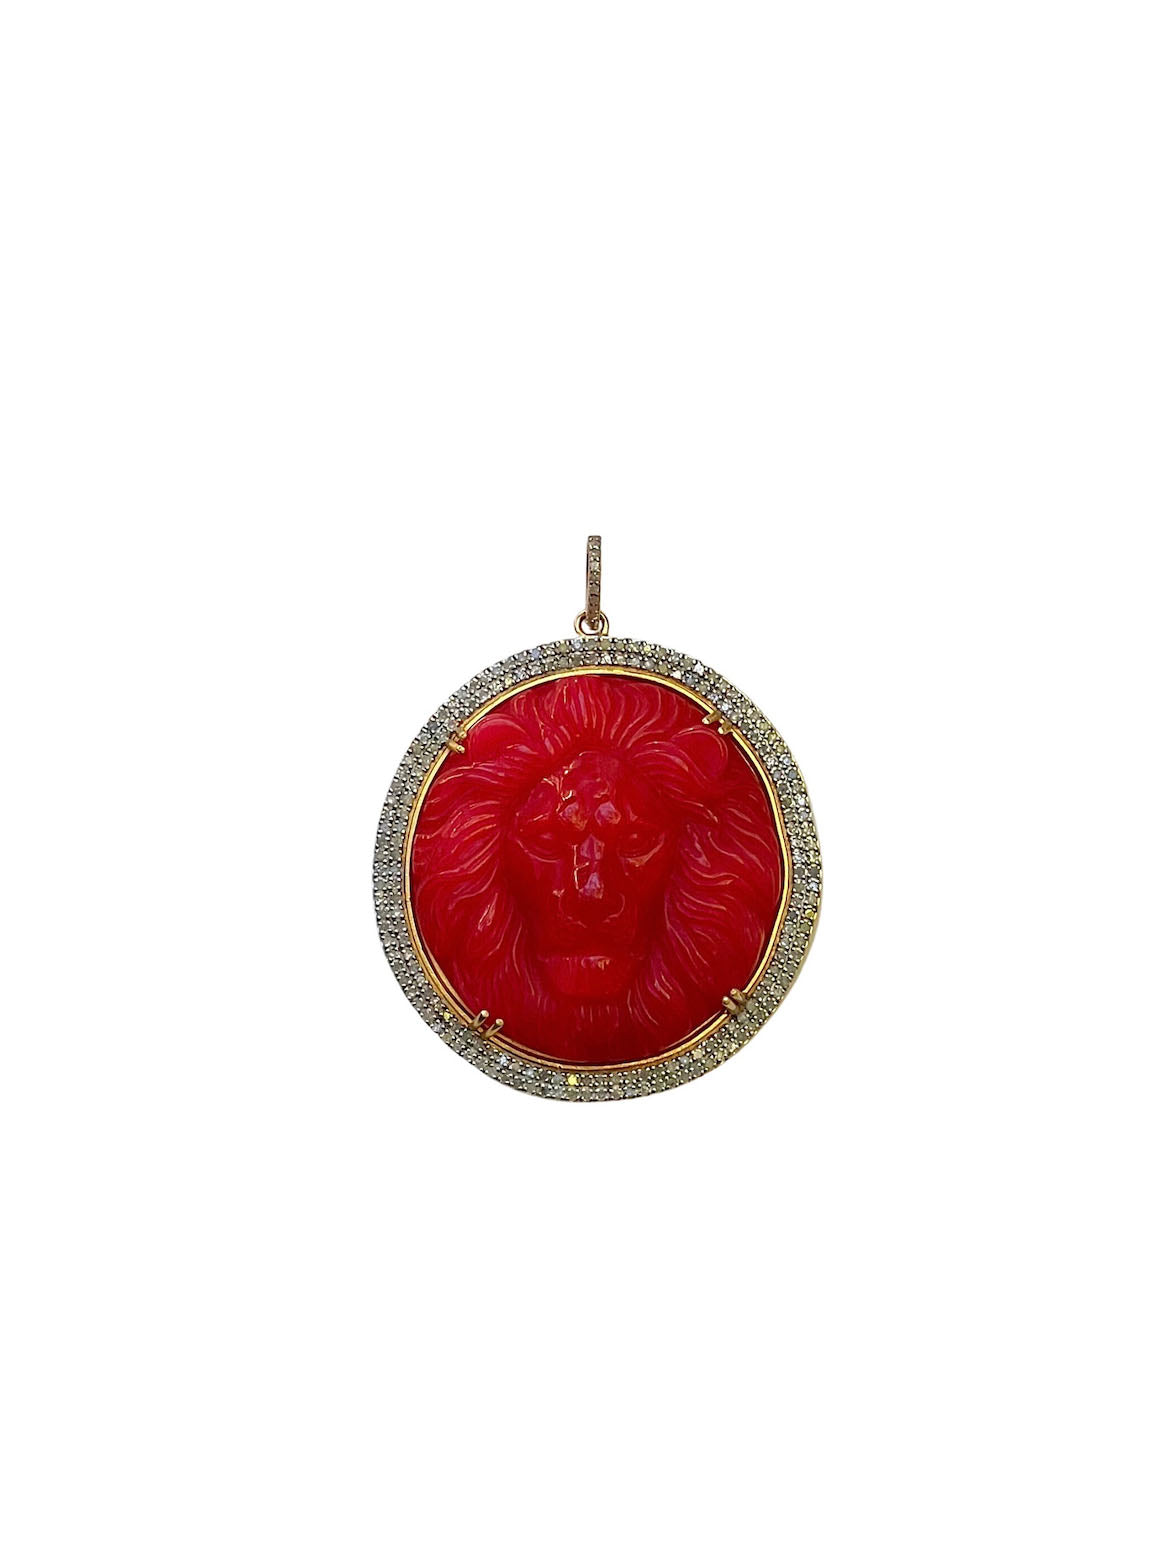 Carved Coral Lion Set in Pave Diamonds in 22kt Gold over Brass